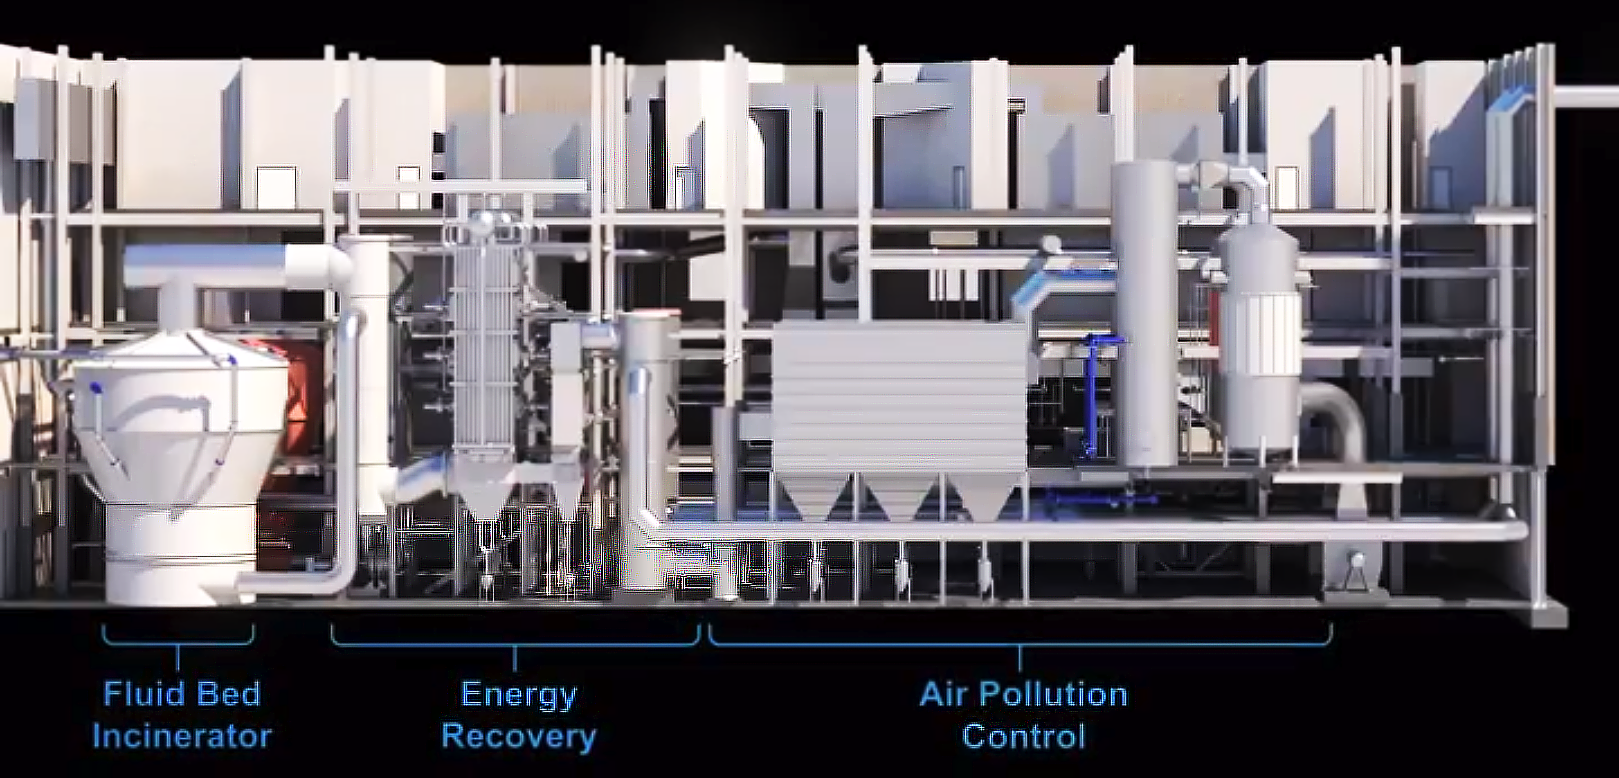 This is a 3D rendered cross-section view of the plant displaying the machinery explained in the video. This machinery is white while the background is black. Text is used to label the different sections of machinery such as the fluid bed incinerator, energy recovery machines, and air pollution control machines. 